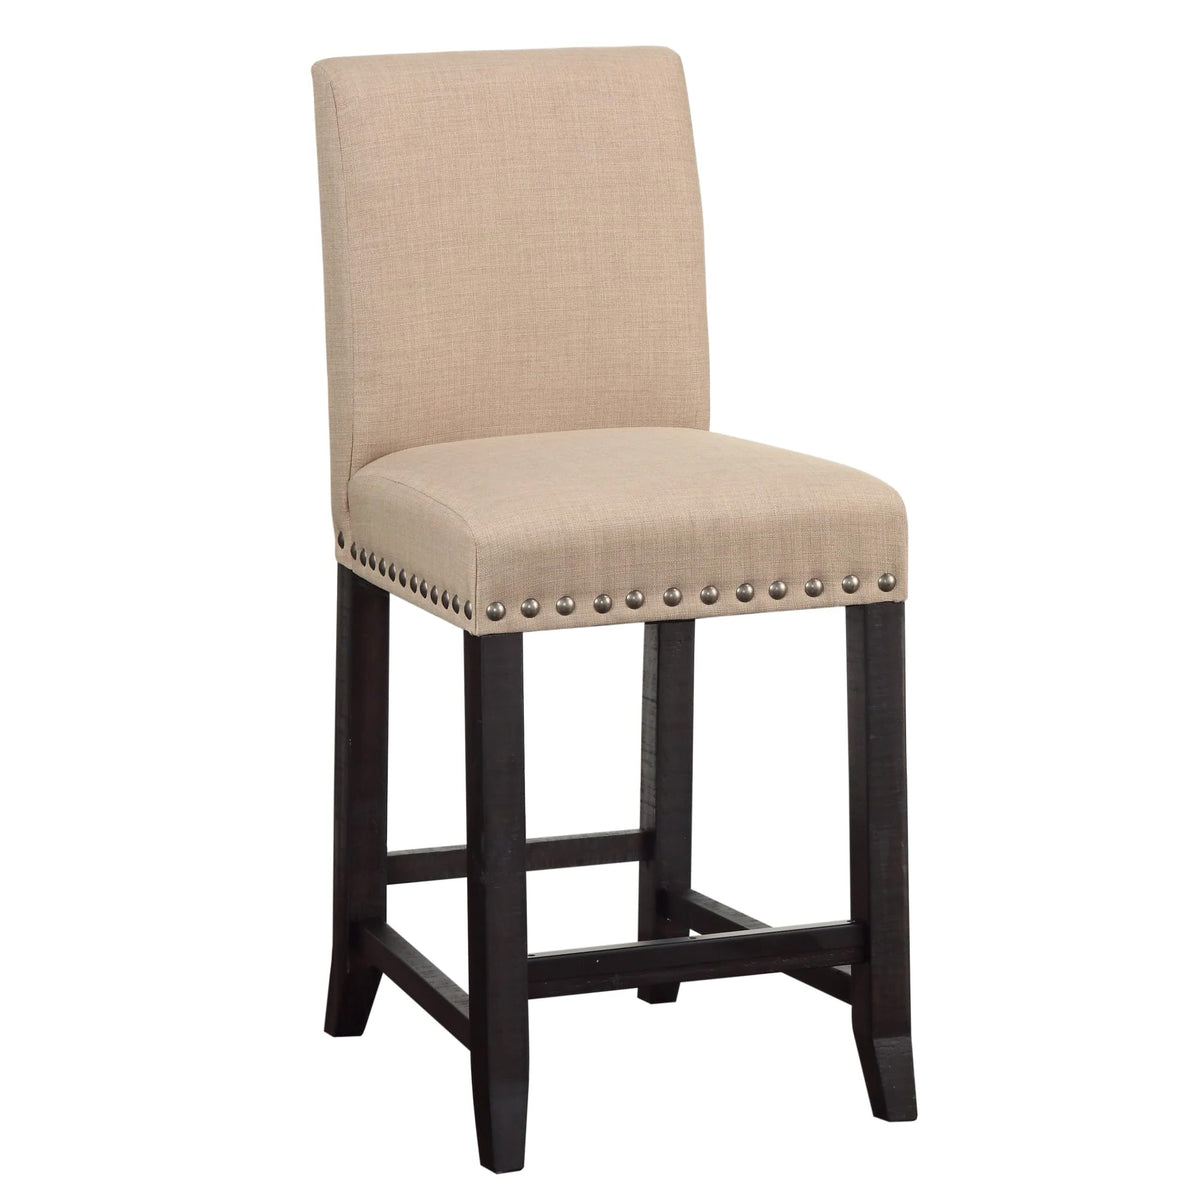 Fabric Upholstered Wooden Counter Height Stool with Nail head Trim, Set of 2,  Brown - BM187613